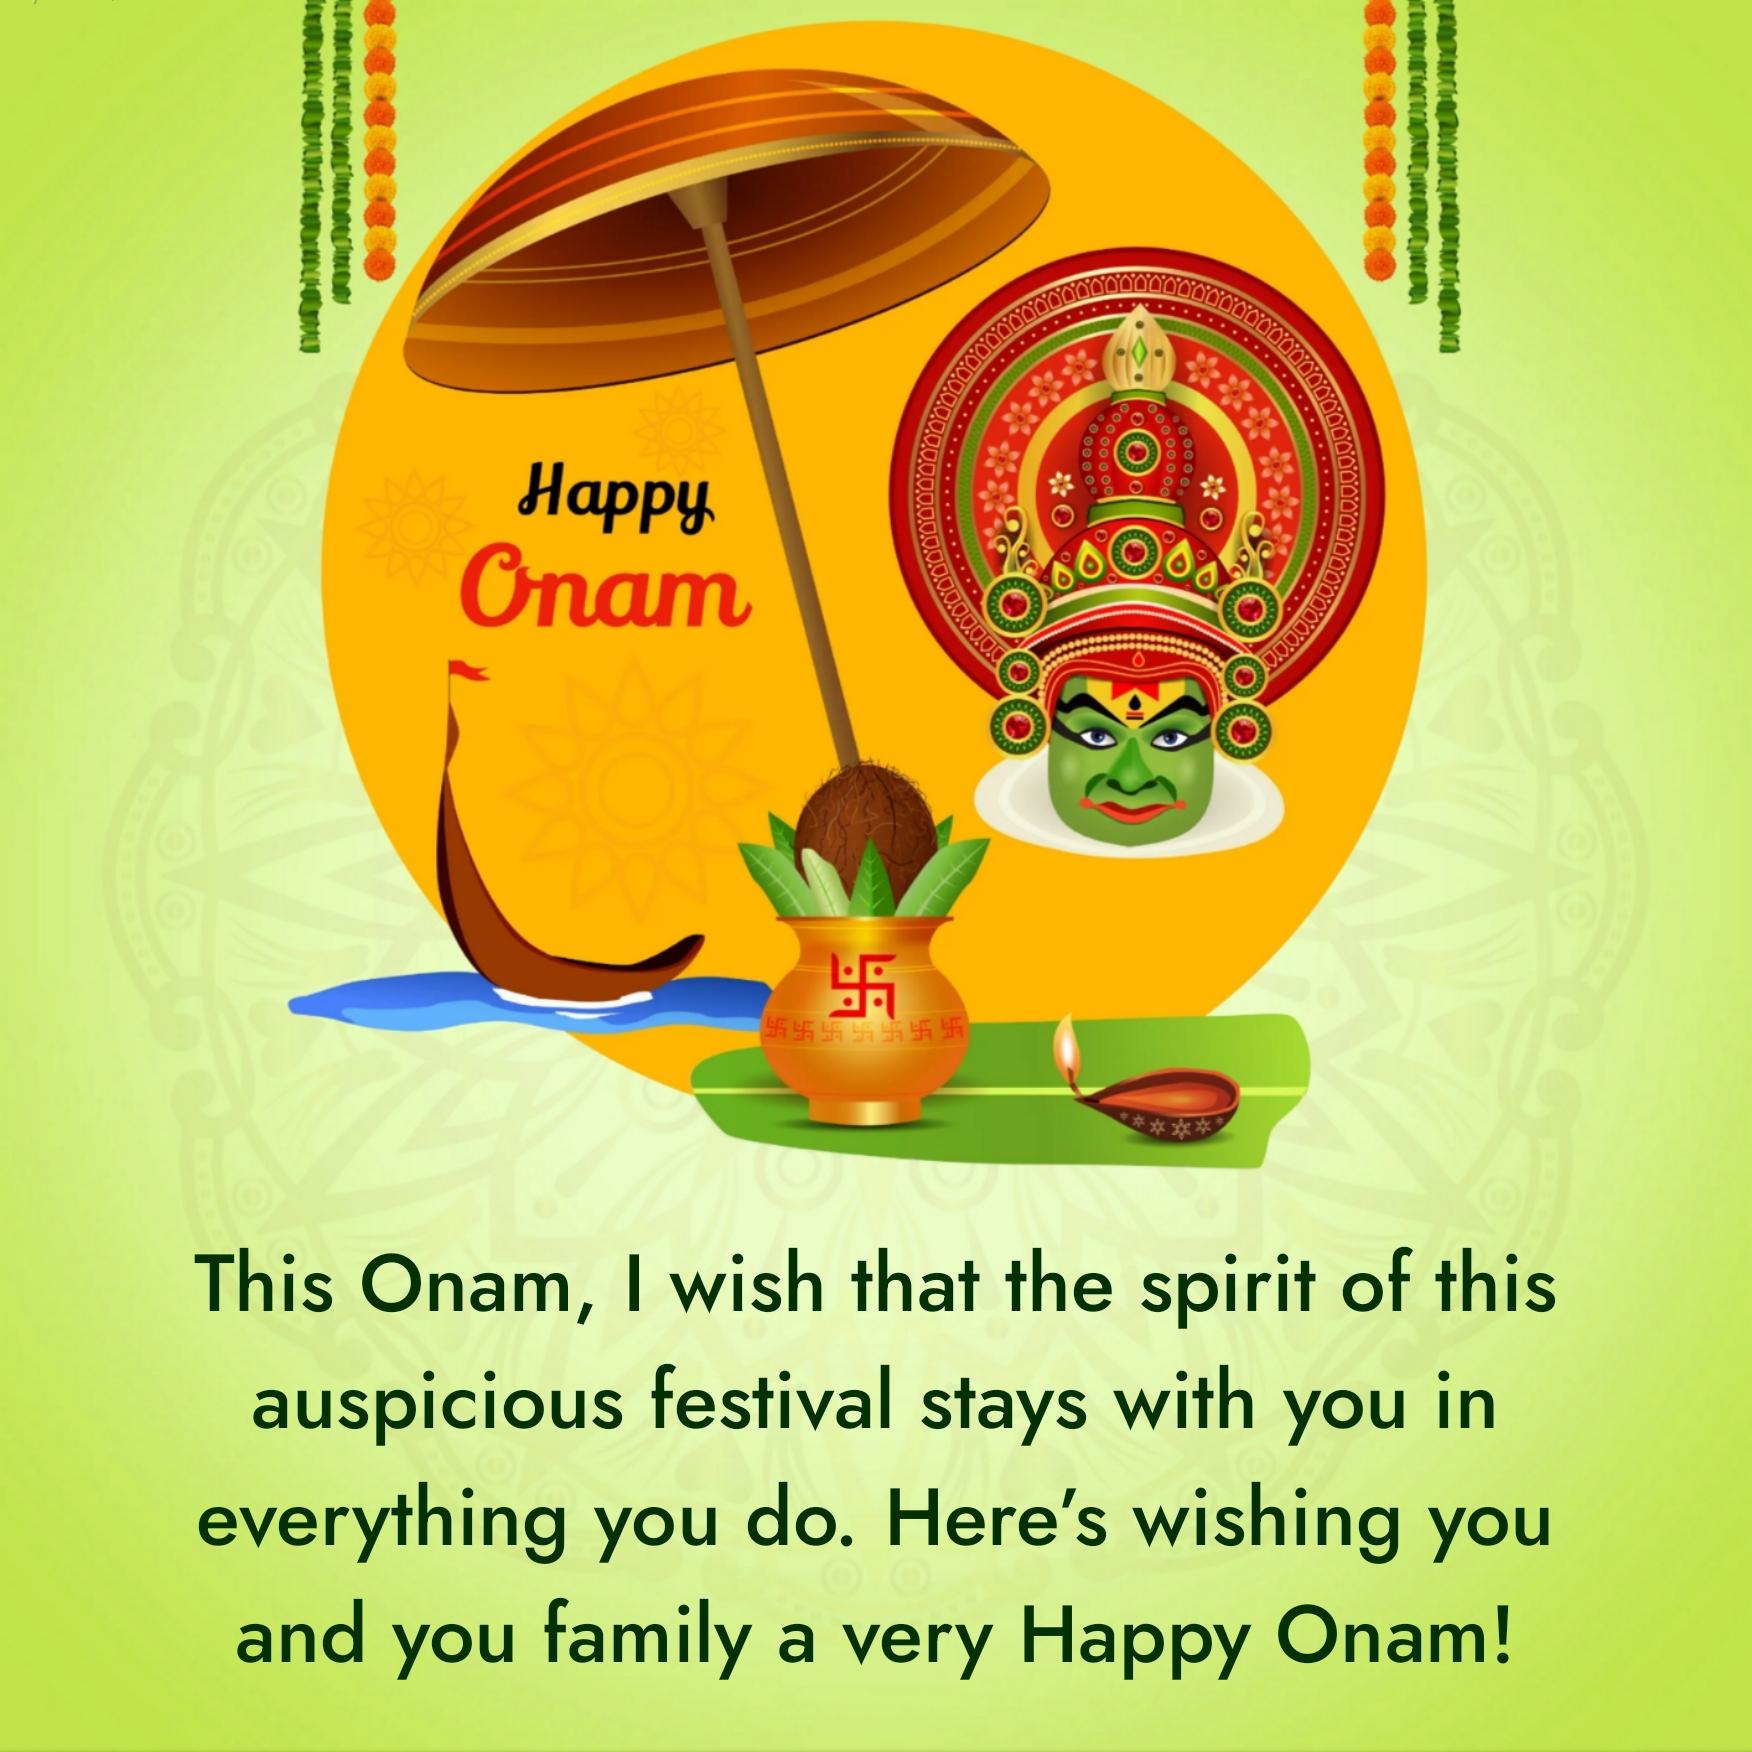 This Onam I wish that the spirit of this auspicious festival stays with you